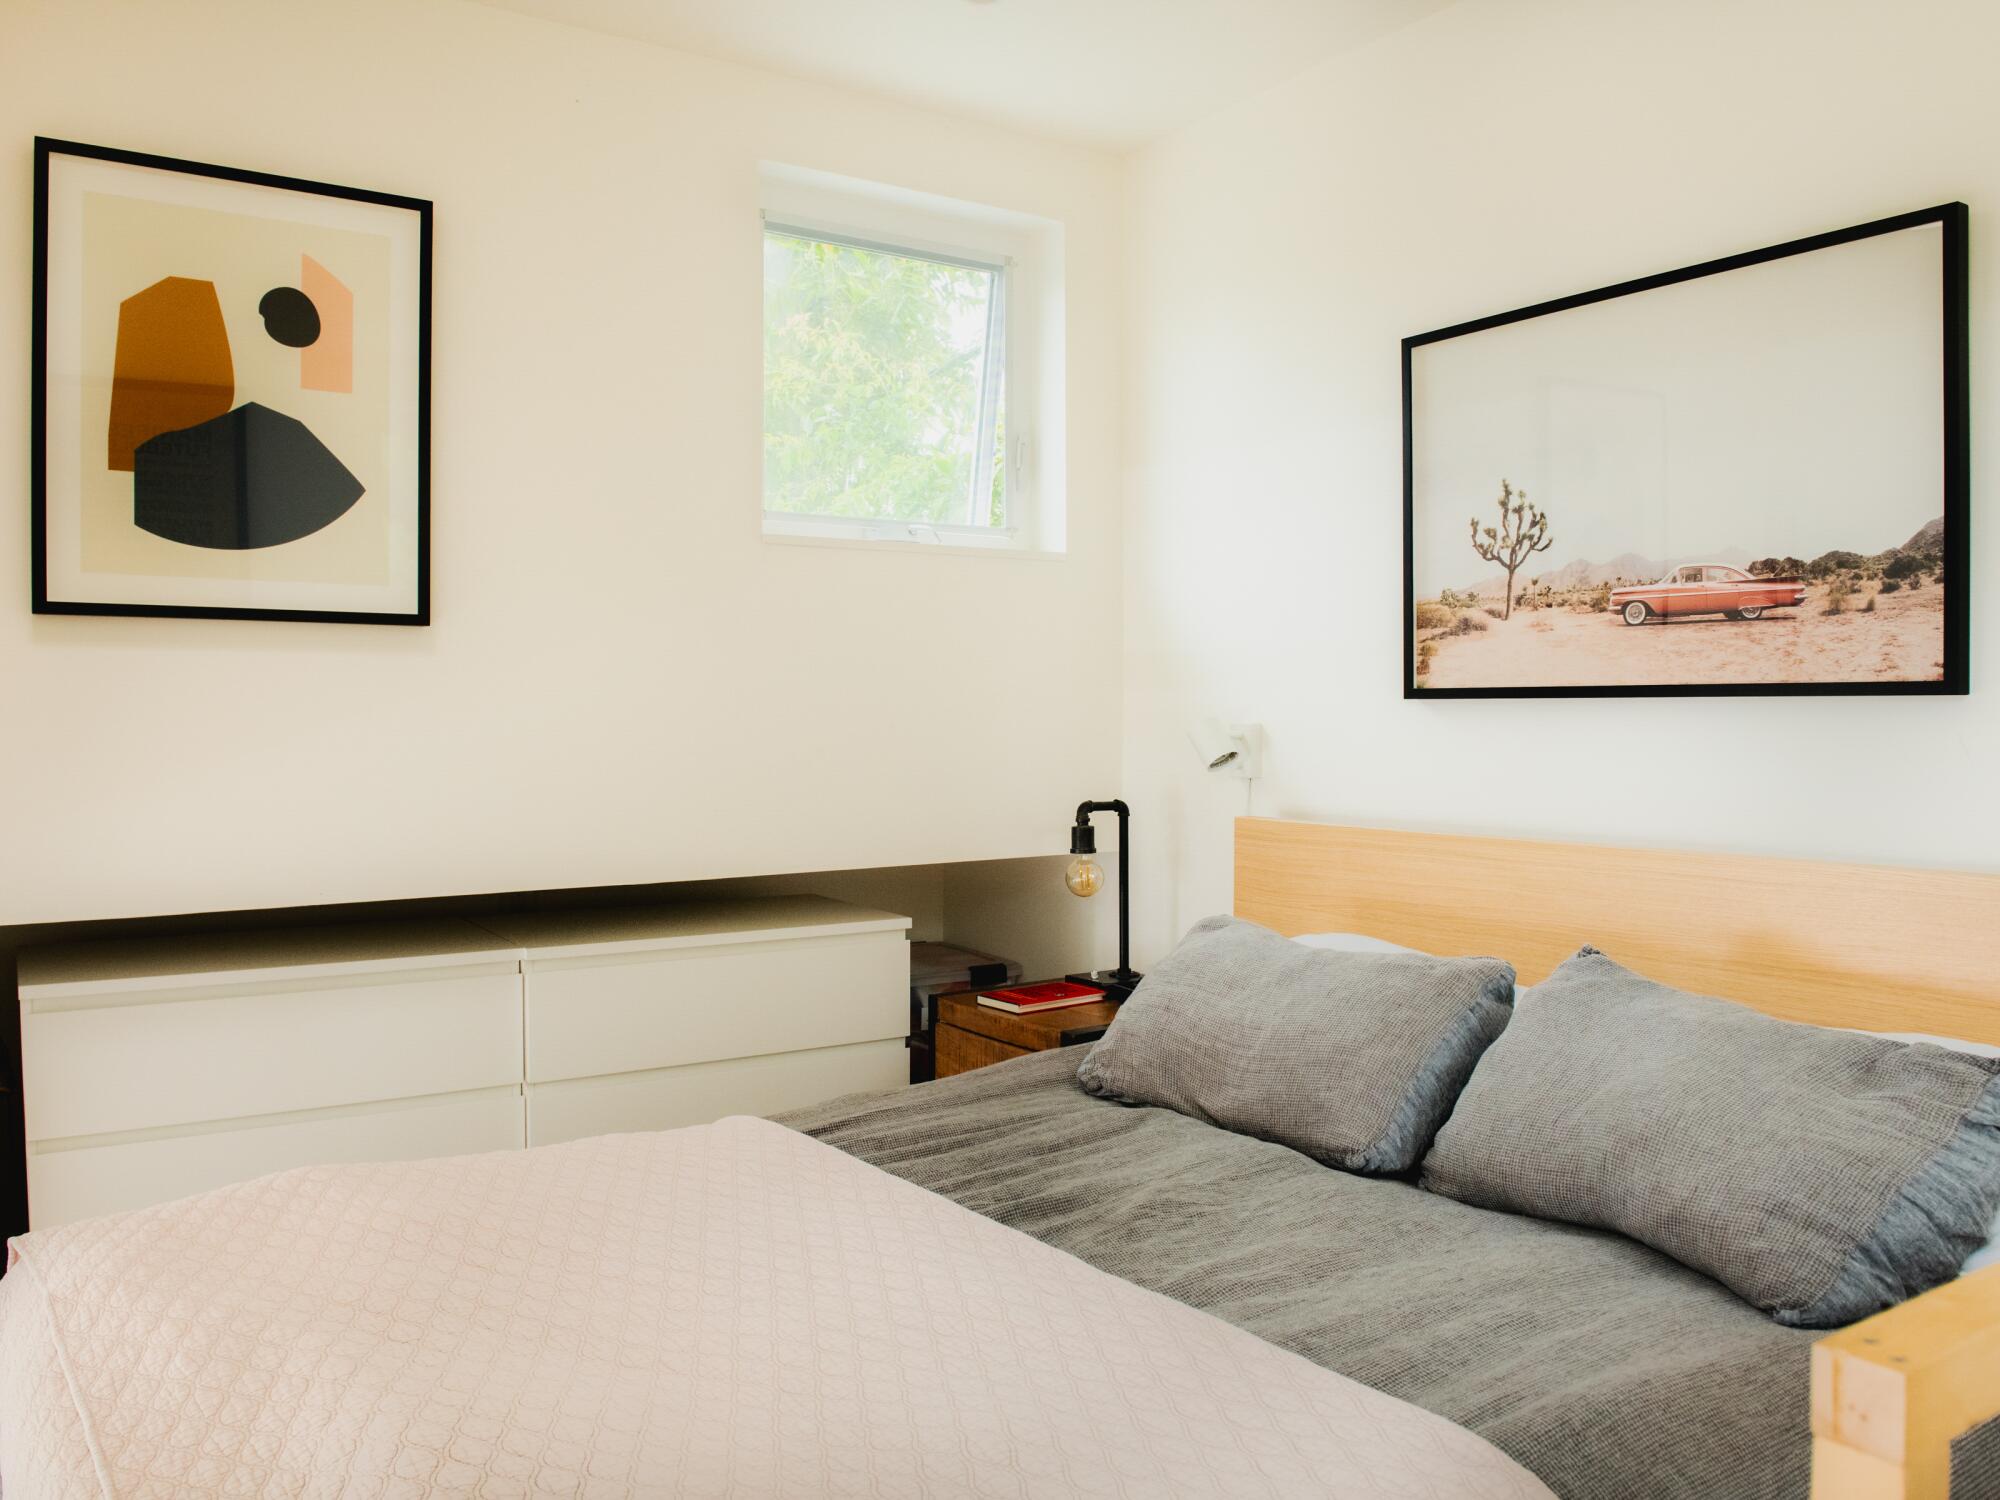 A bedroom with art on the walls and a small square window.